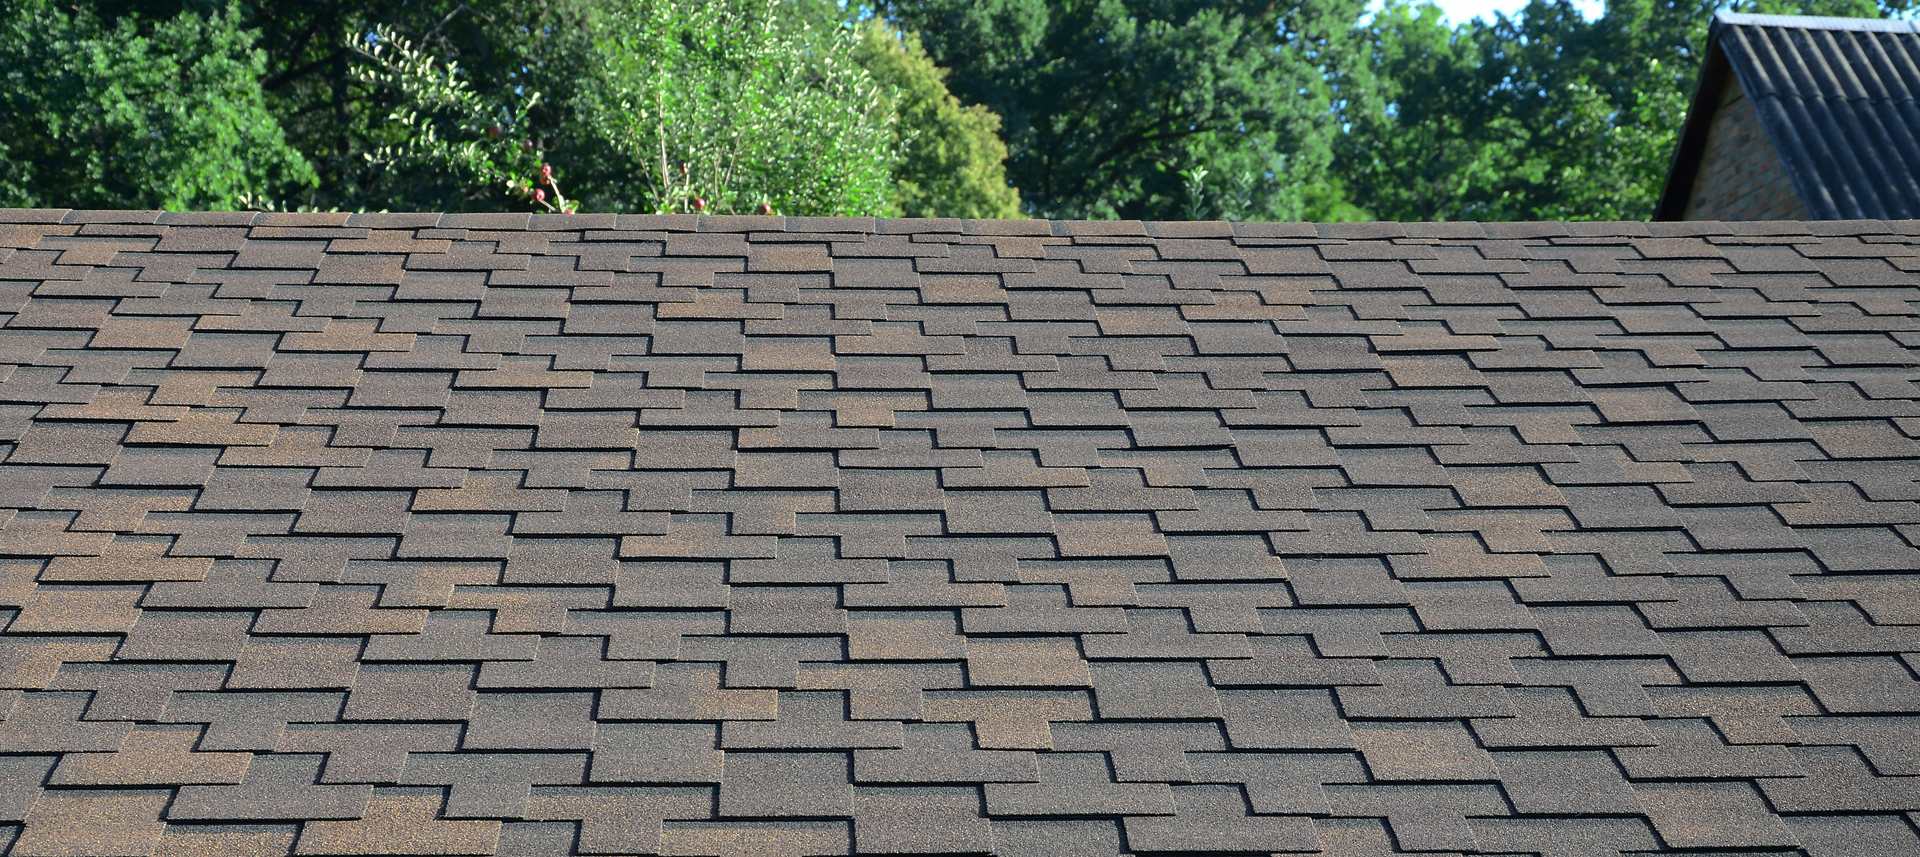 Yunk Roofing Remodeling - Shingle Roofing Repairs and Replacement